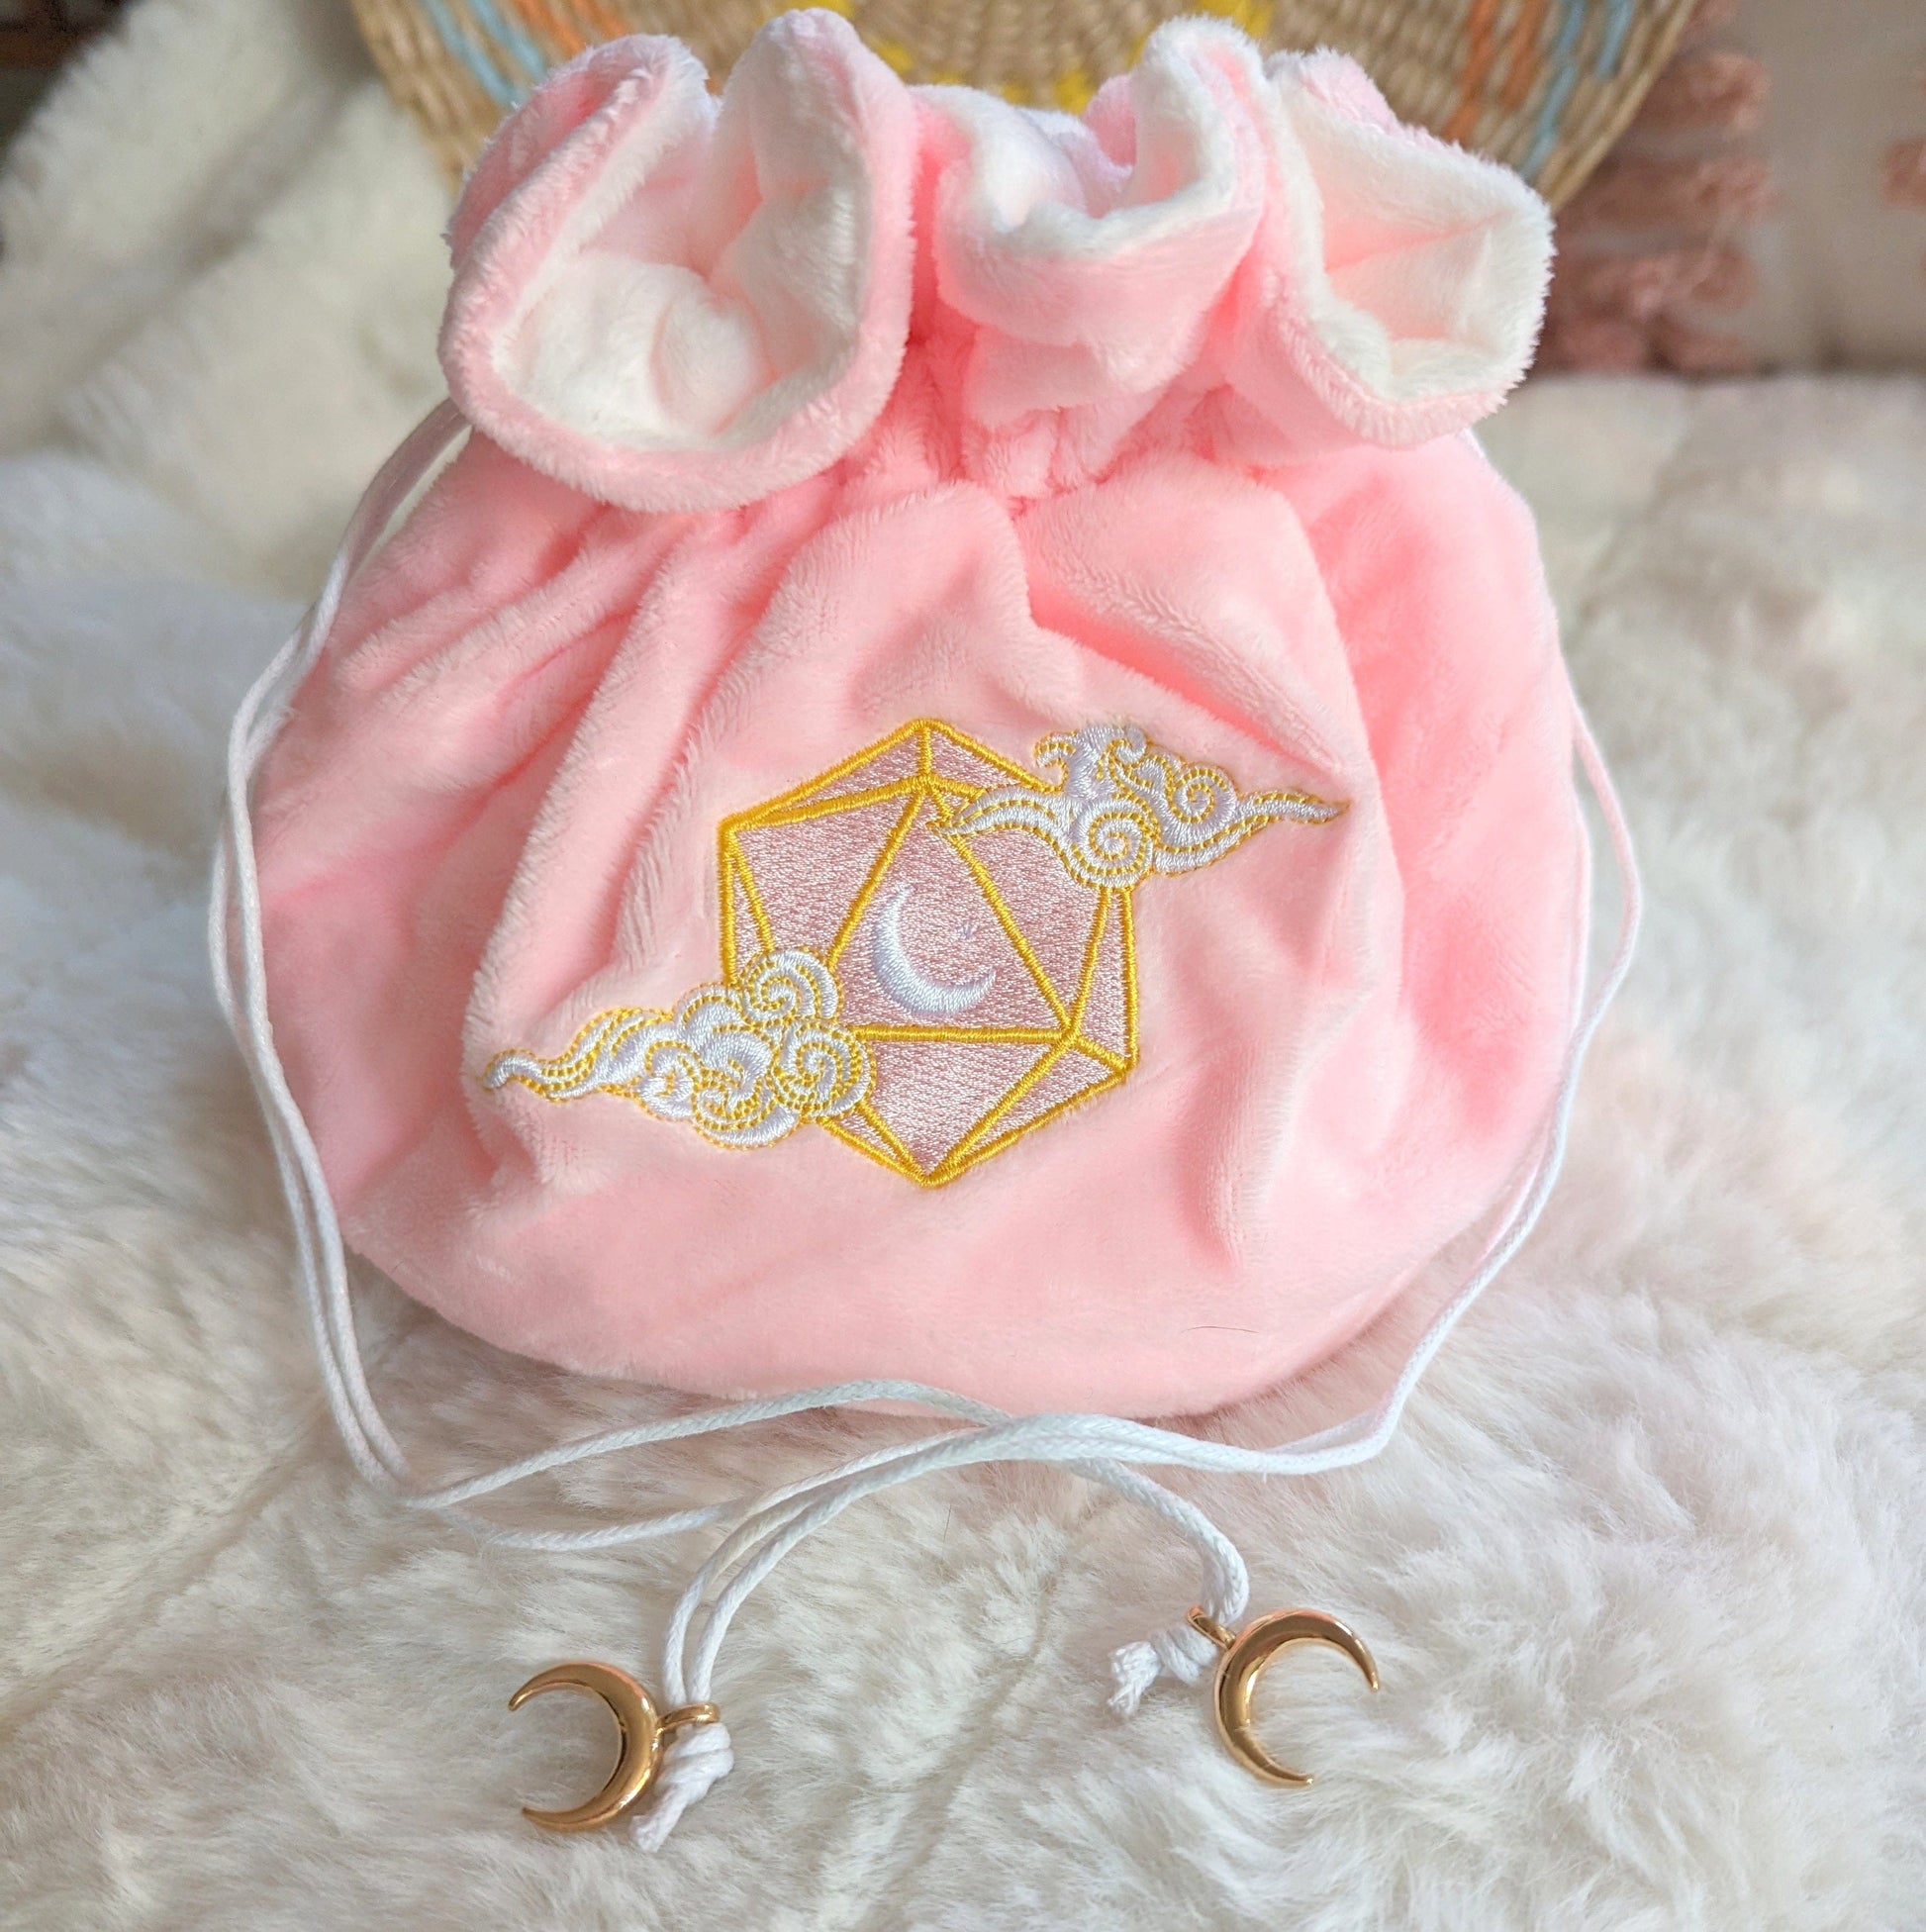 Dreamy dice bag. Multi pocket large dice bag in pink and white